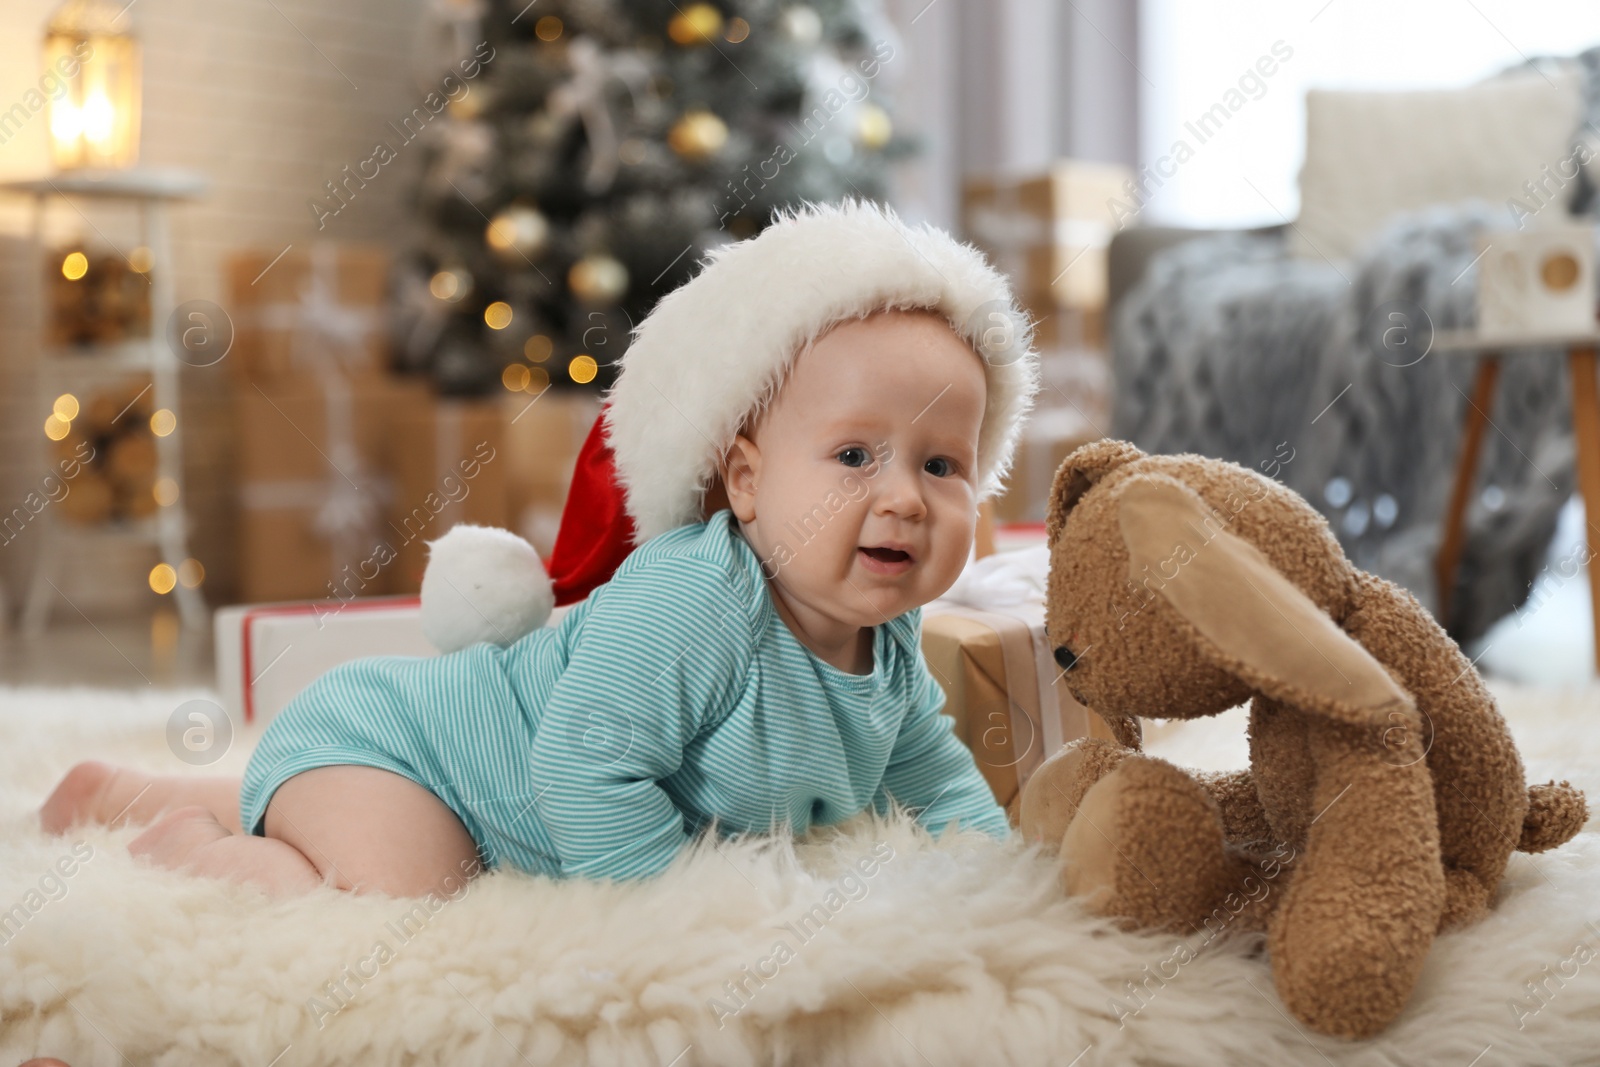 Image of Cute baby in Santa hat crawling on floor. First Christmas